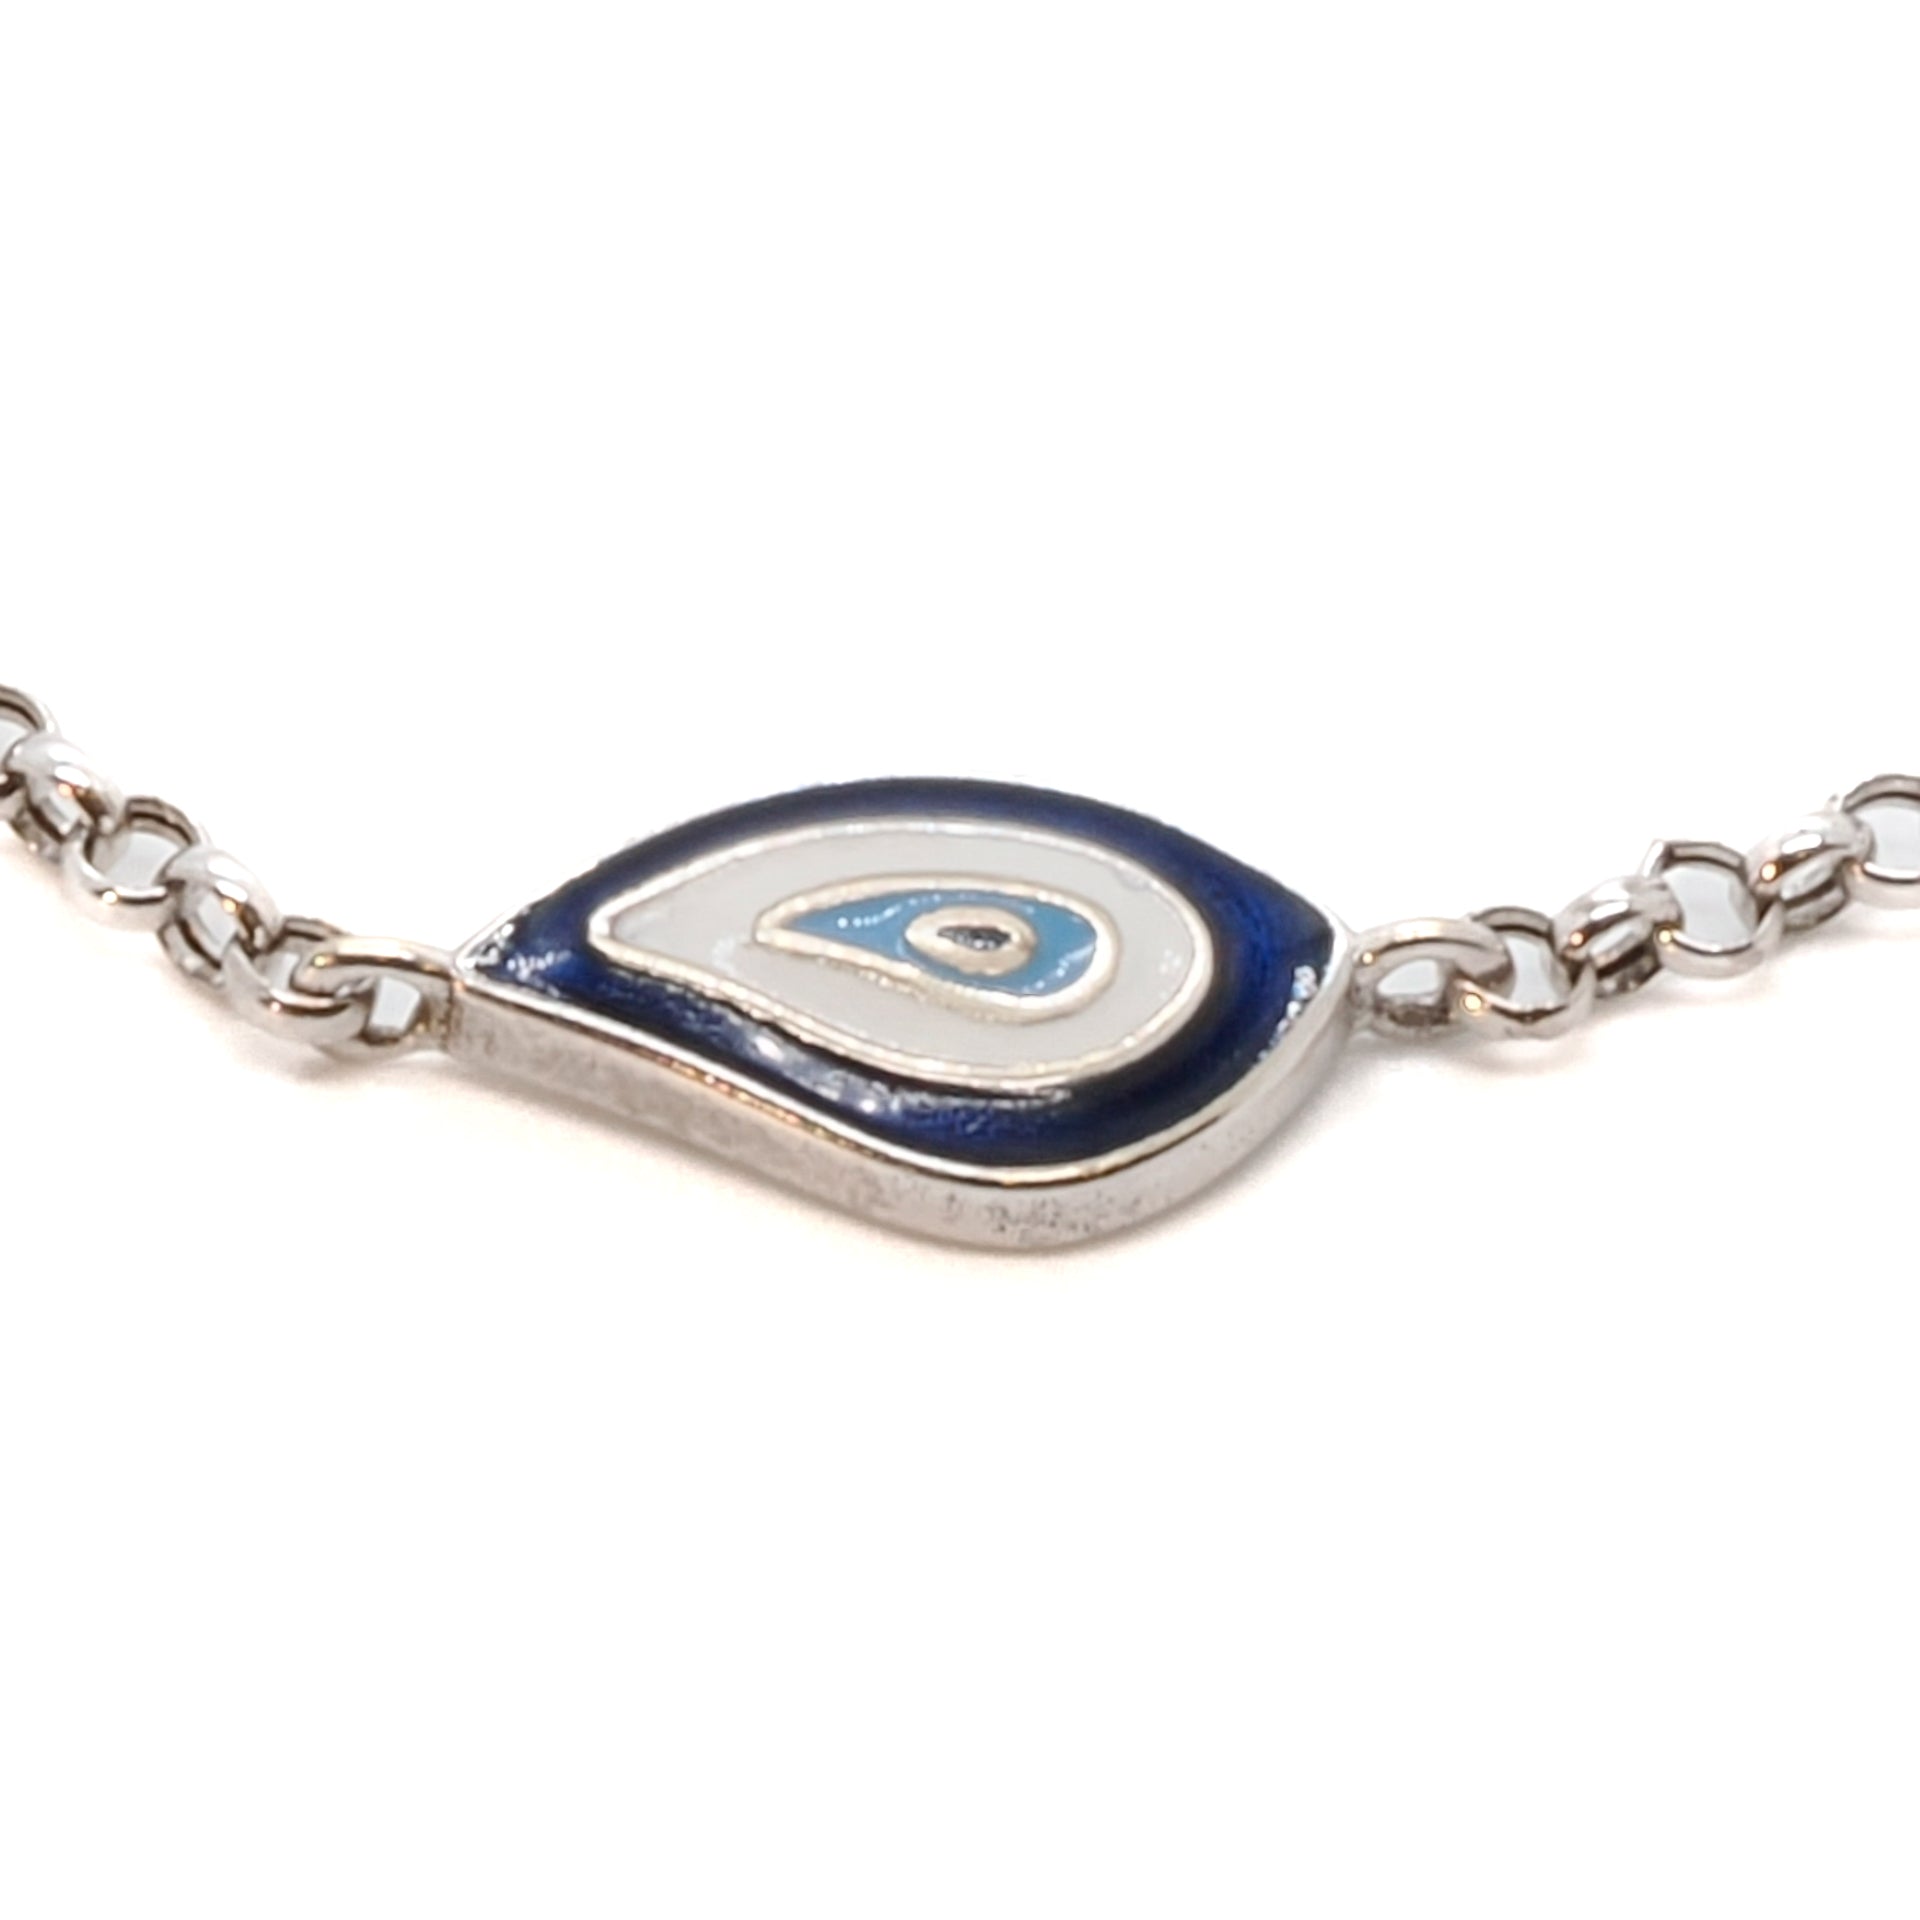 Handmade with Love - Teardrop Evil Eye Bracelet, crafted to perfection in the USA.